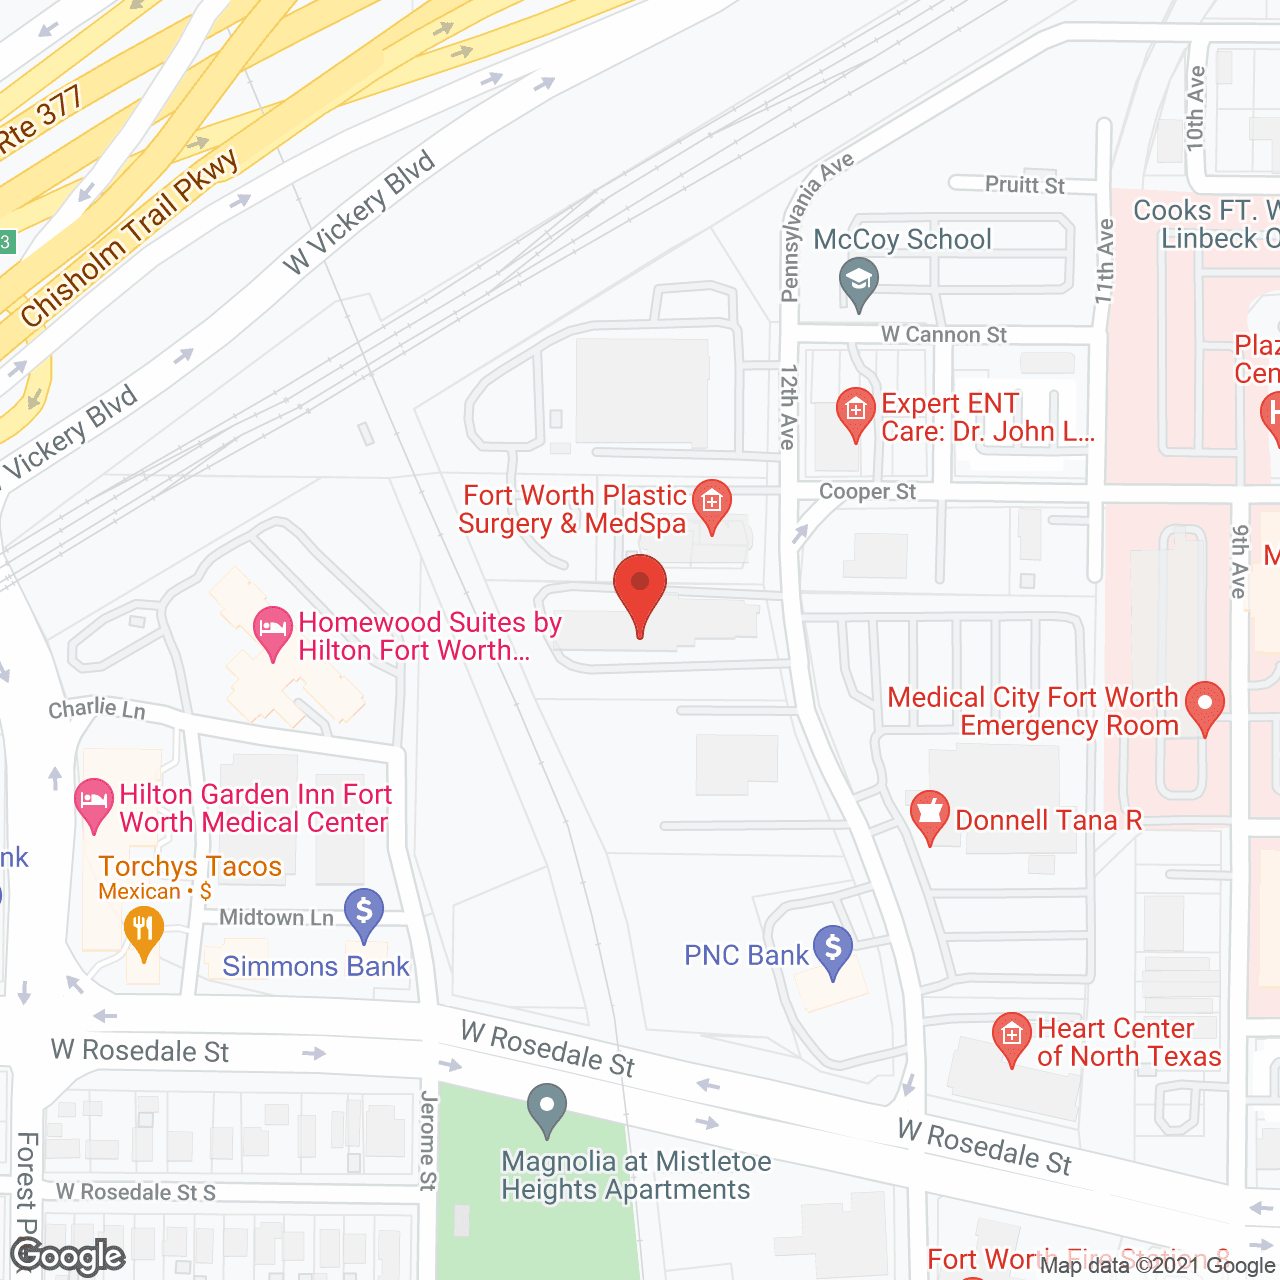 Fort Worth Transitional Care in google map